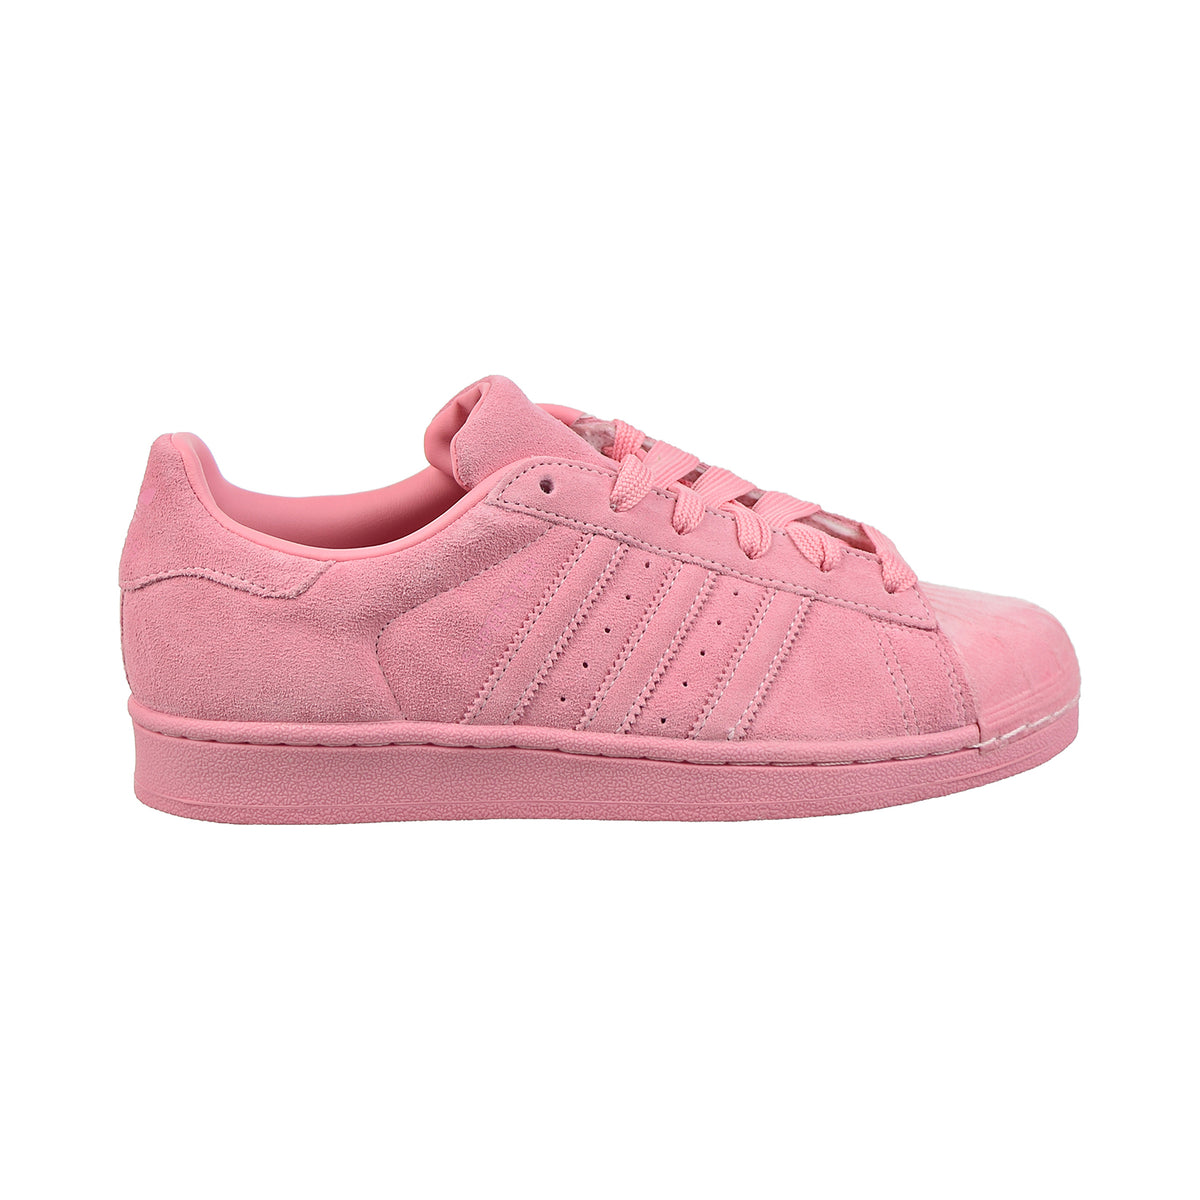 Adidas Superstar Womens Shoes Clear Pink/Clear Pink